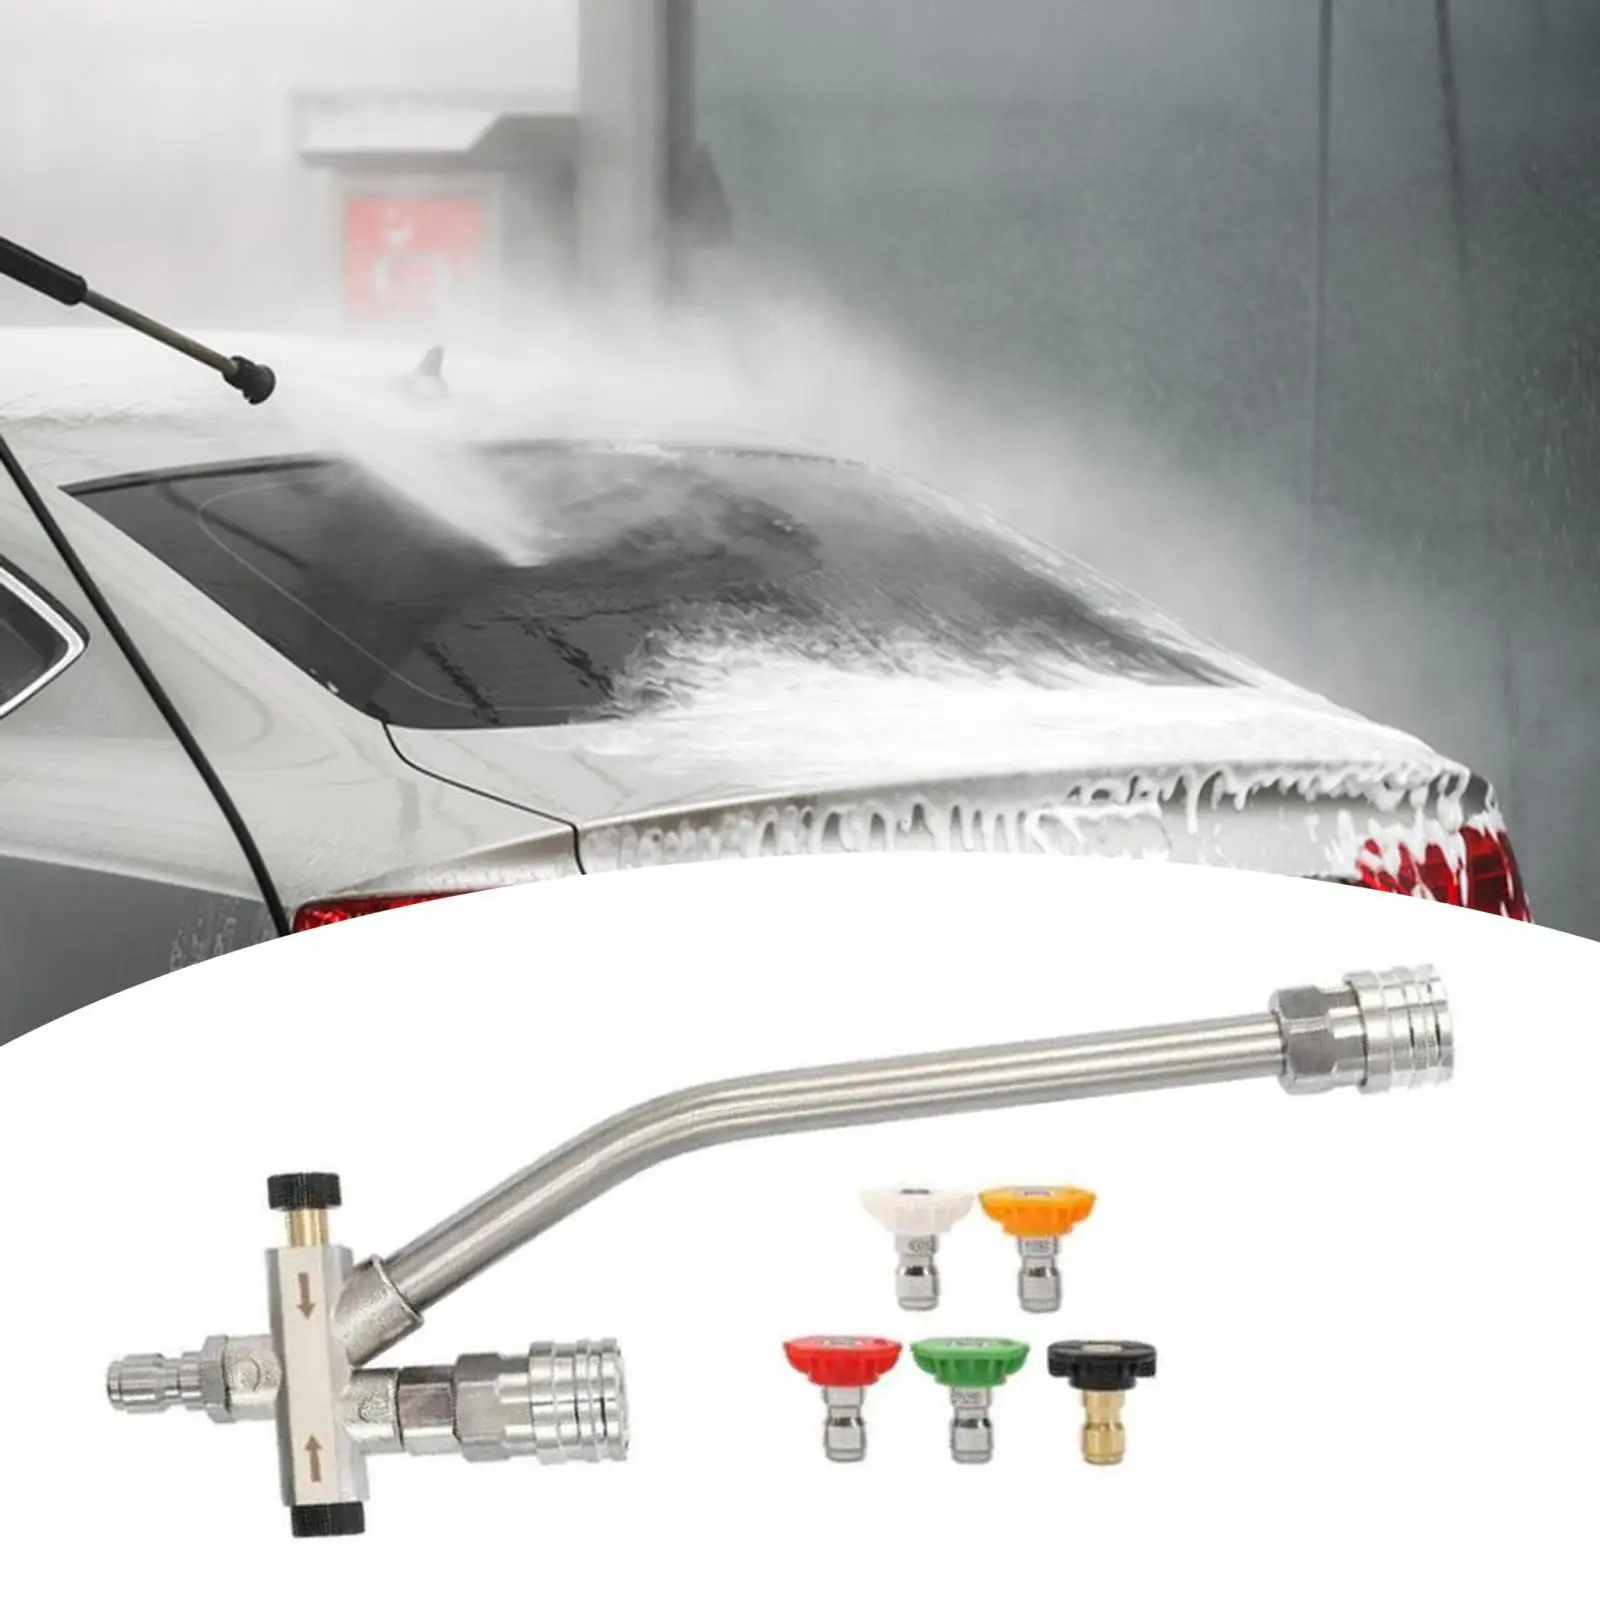 Pressure Washer Accessories for Cleaning Roofs Washing Cars Watering Flowers